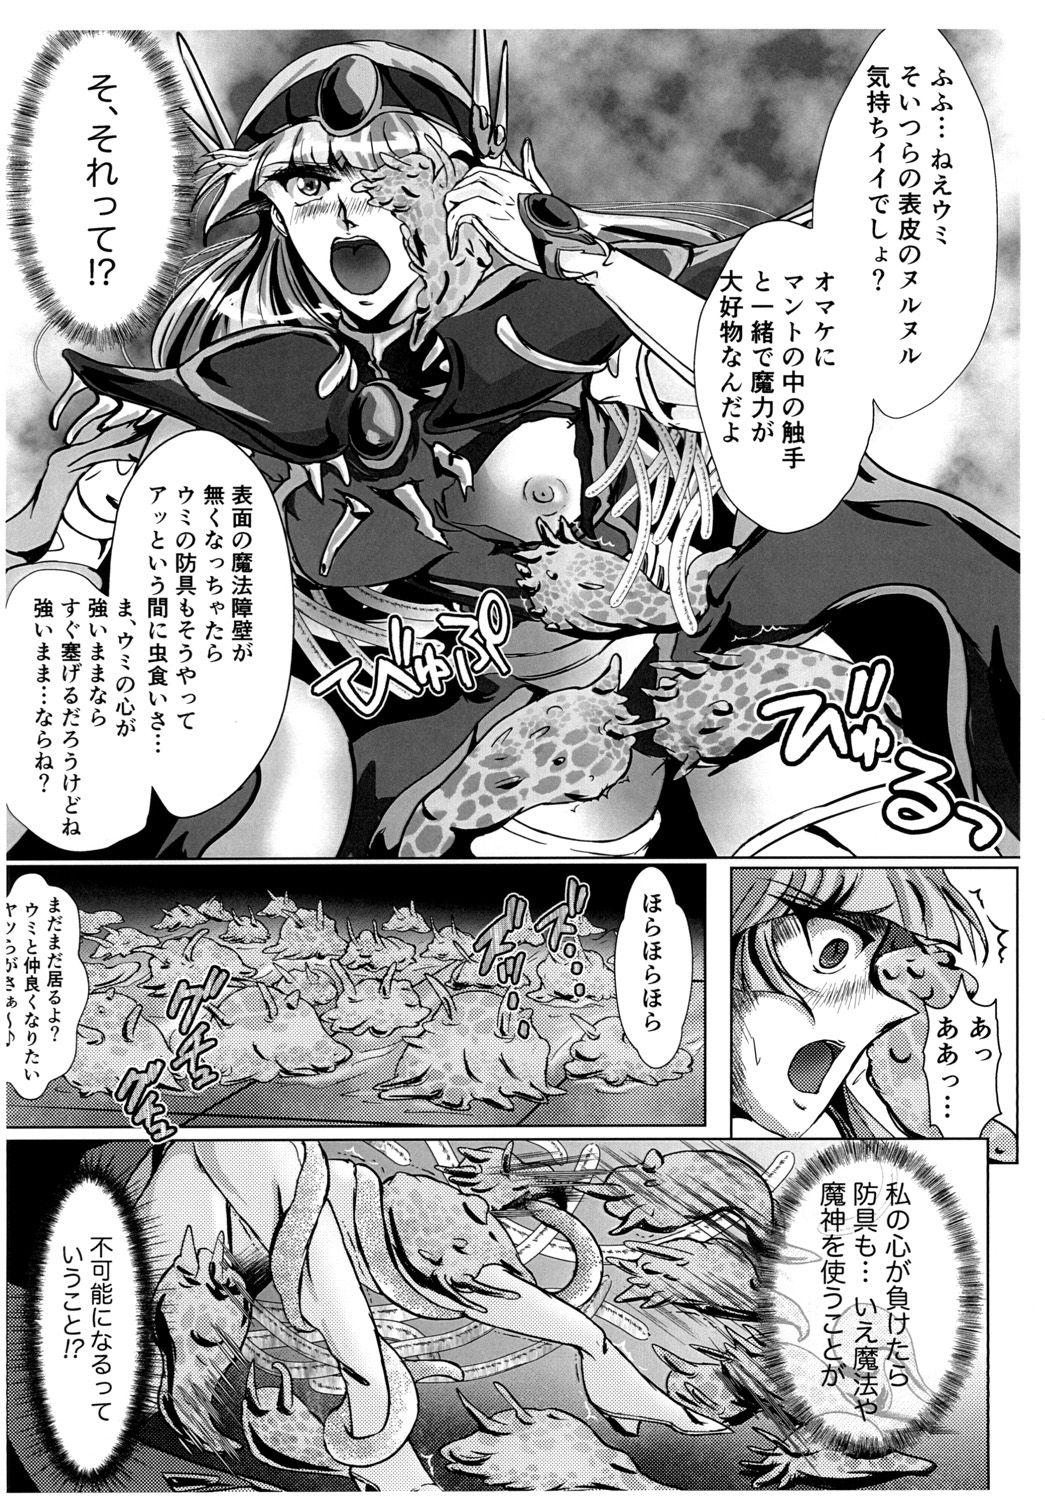 Missionary Porn DARK TEMPEST U-ACT 02 - Magic knight rayearth Great Fuck - Page 12